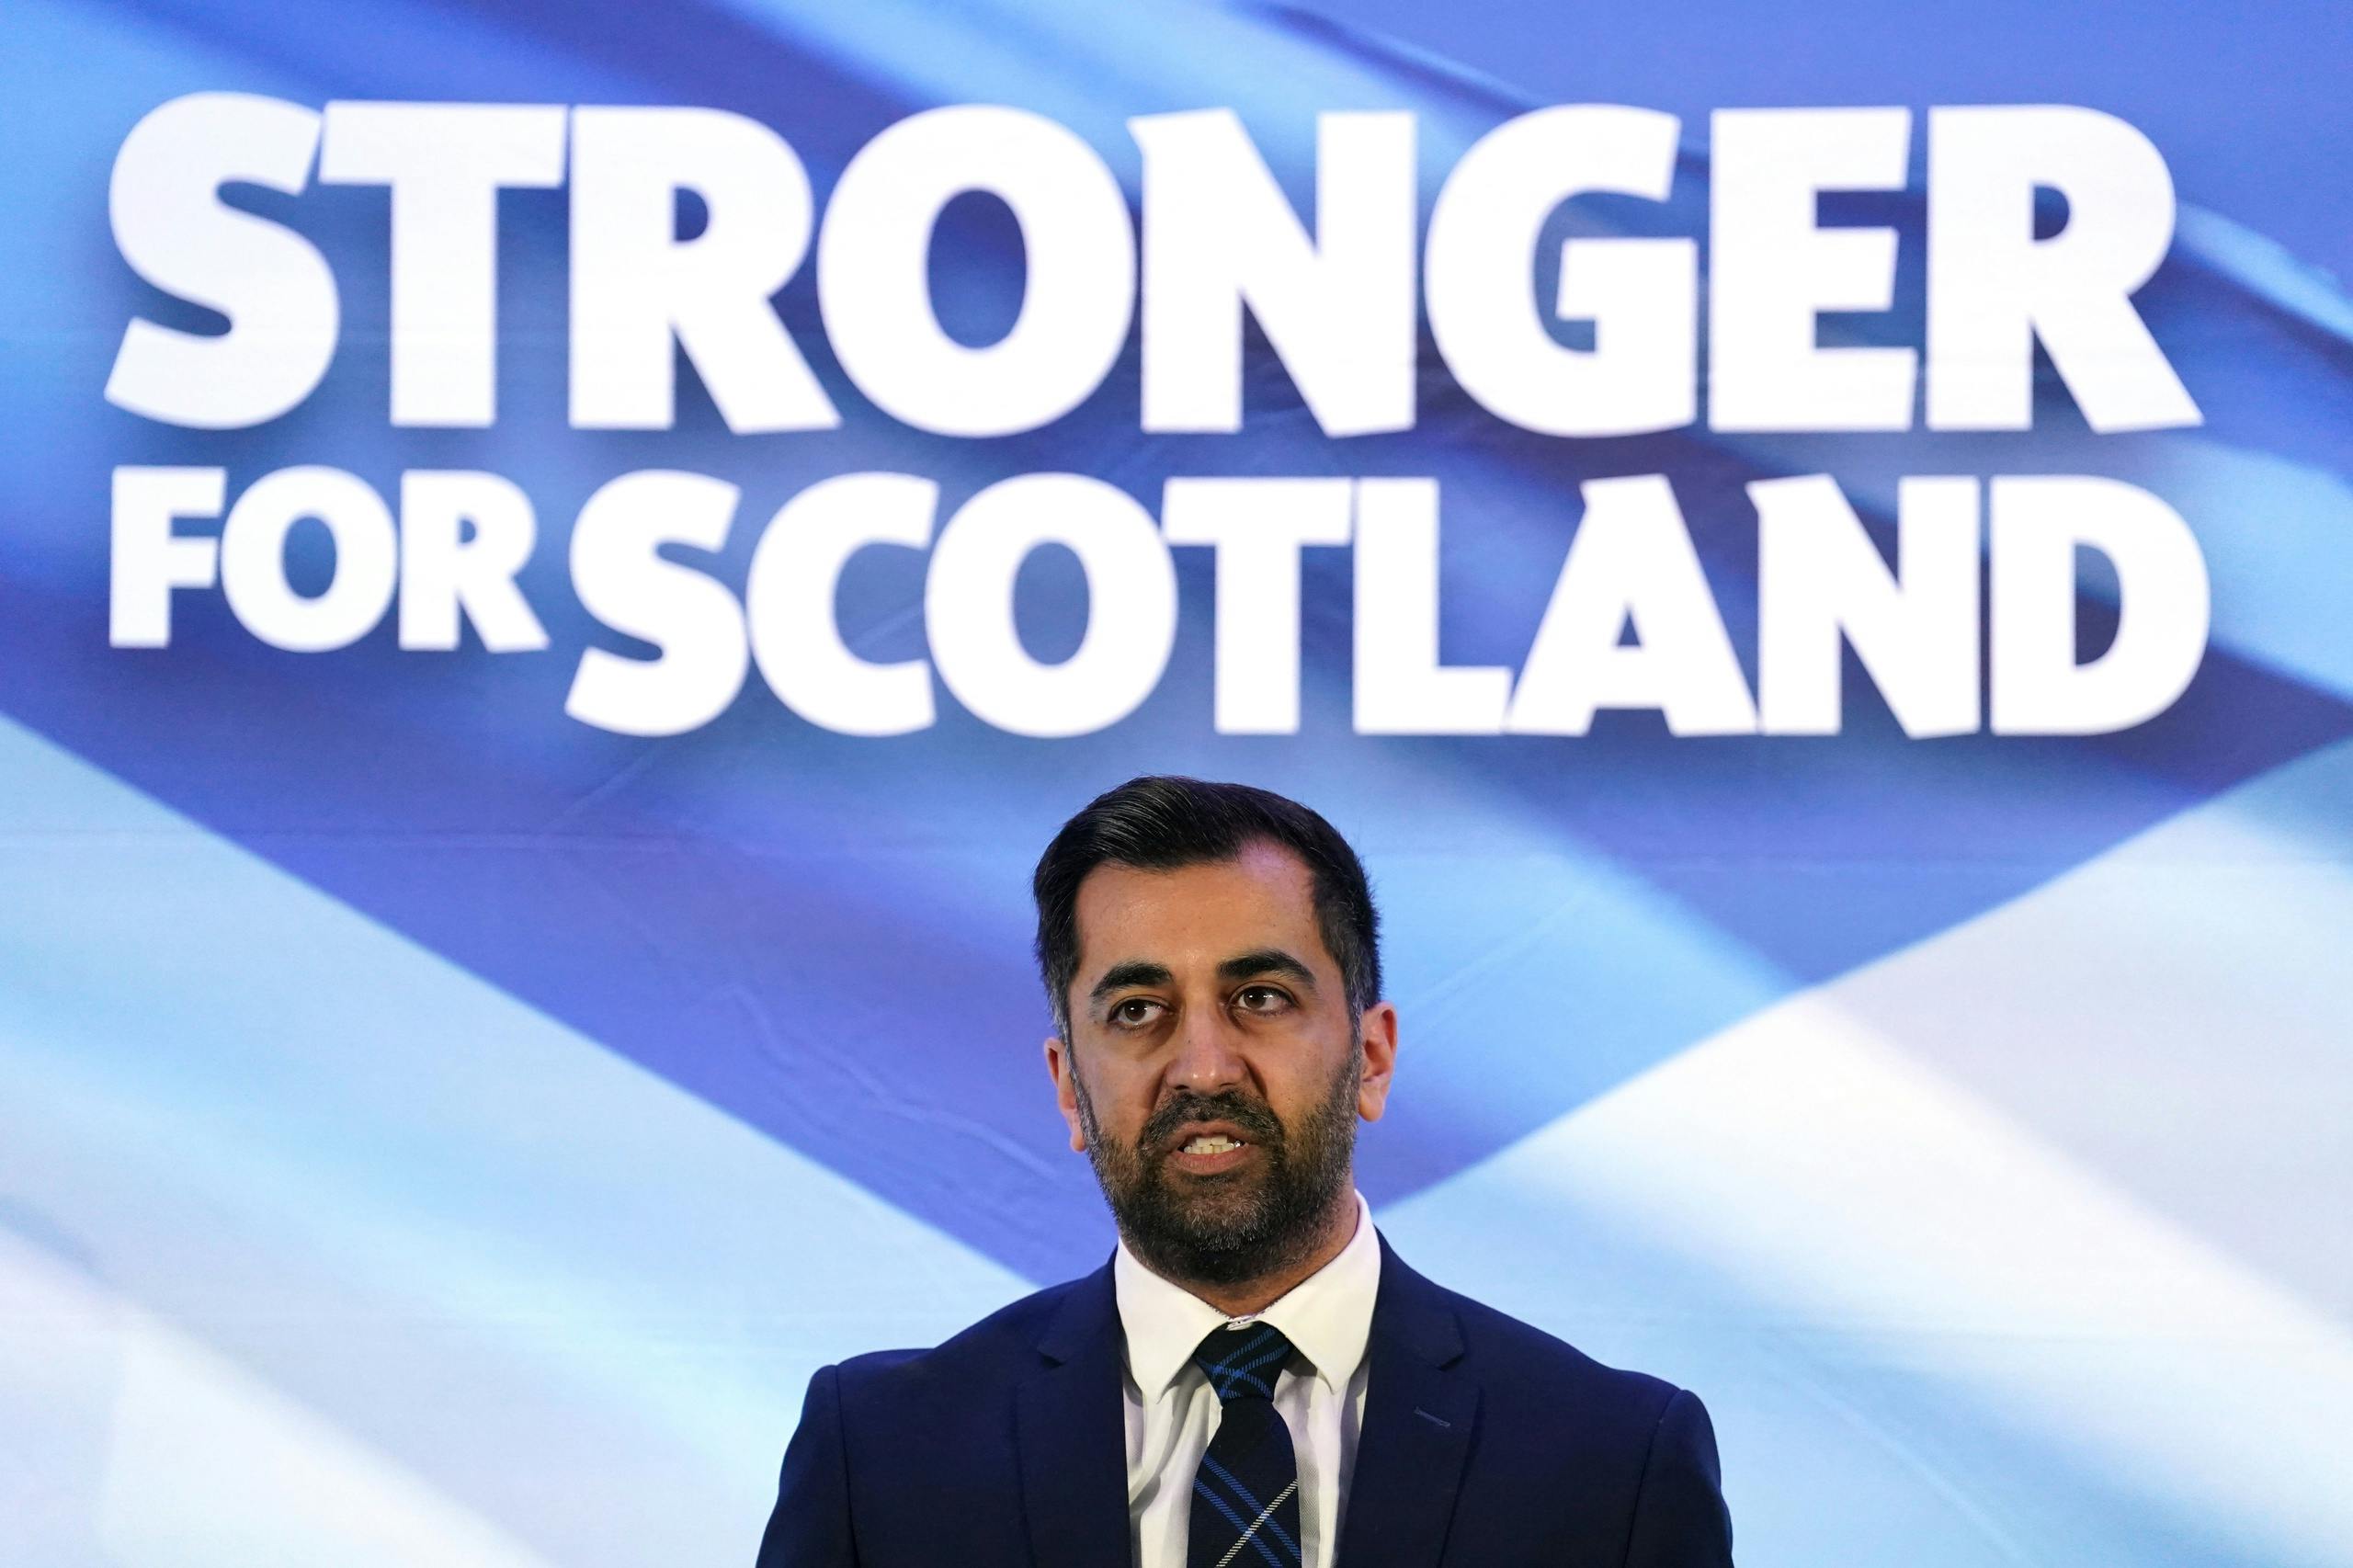 Humza Yousaf awaits ‘tough boat’ as Scotland’s new prime minister